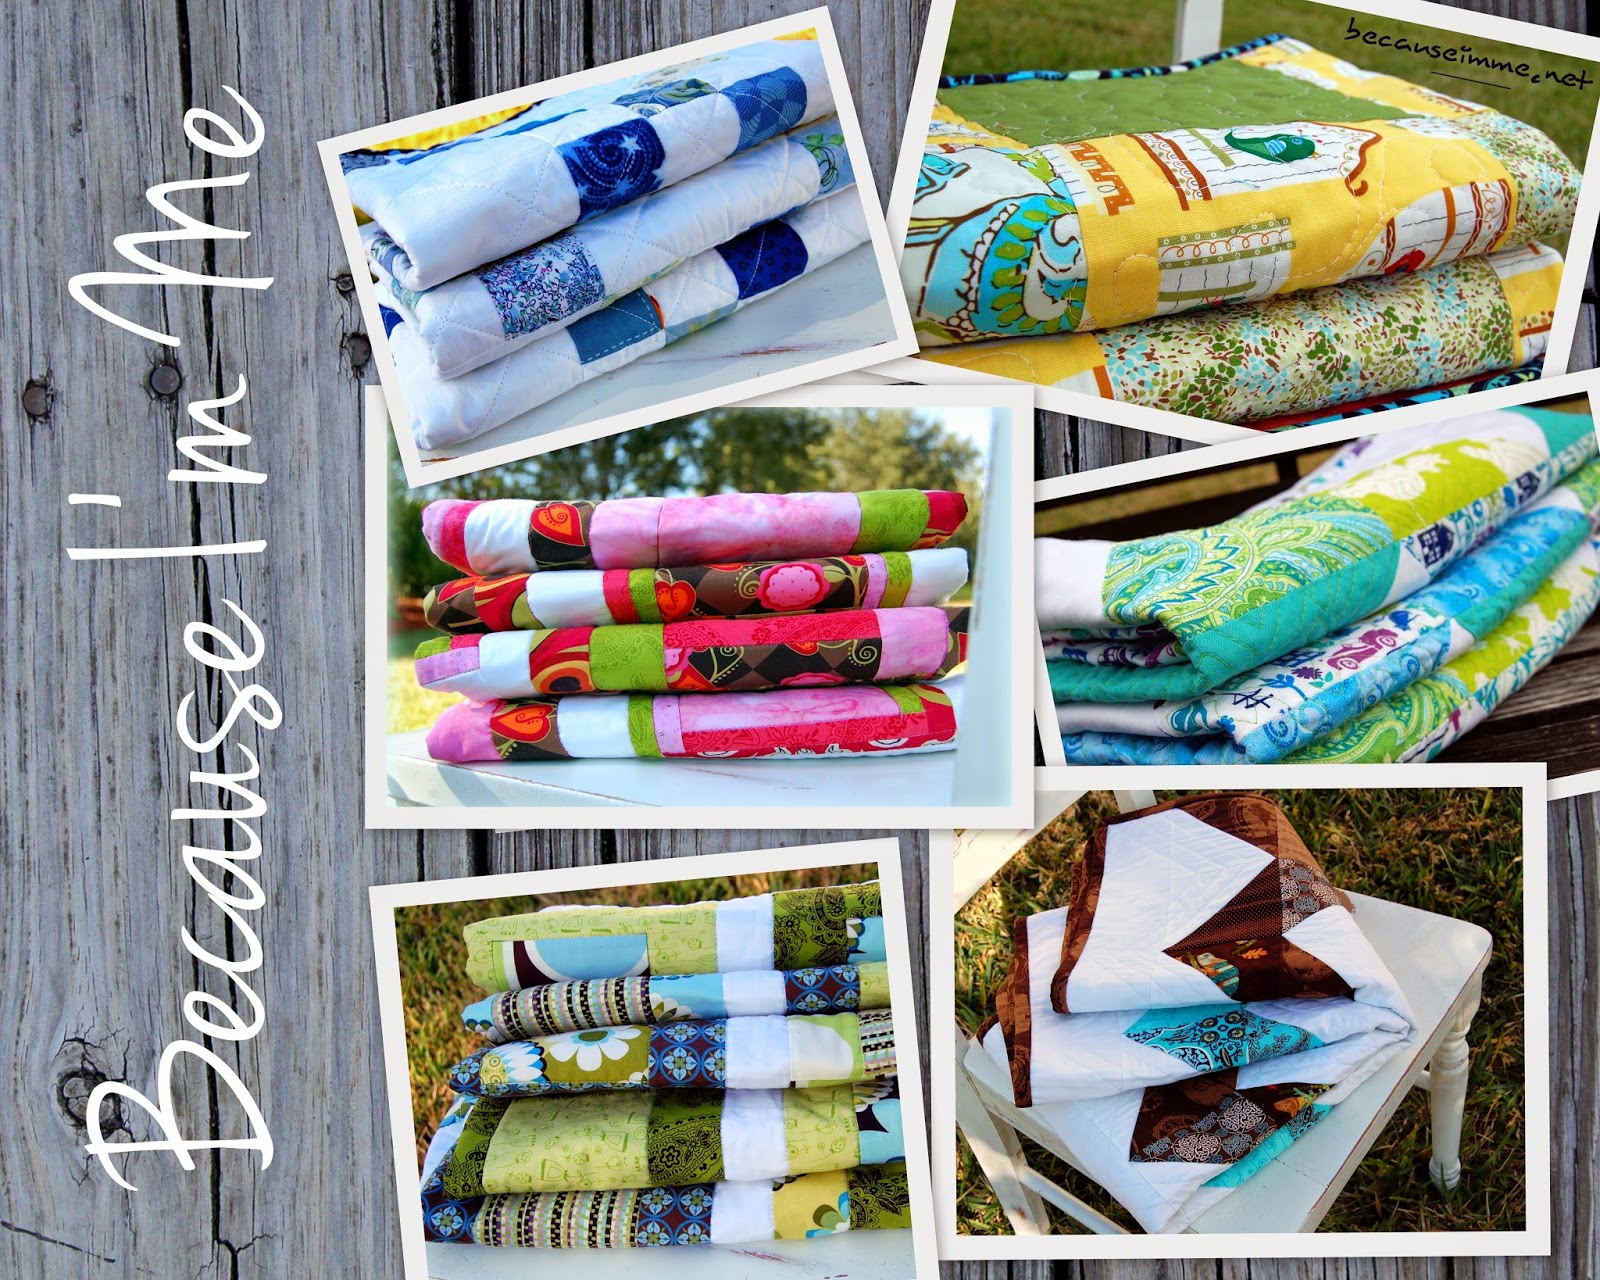  Because I'm Me handcrafted quilts for babies, toddlers, and laps